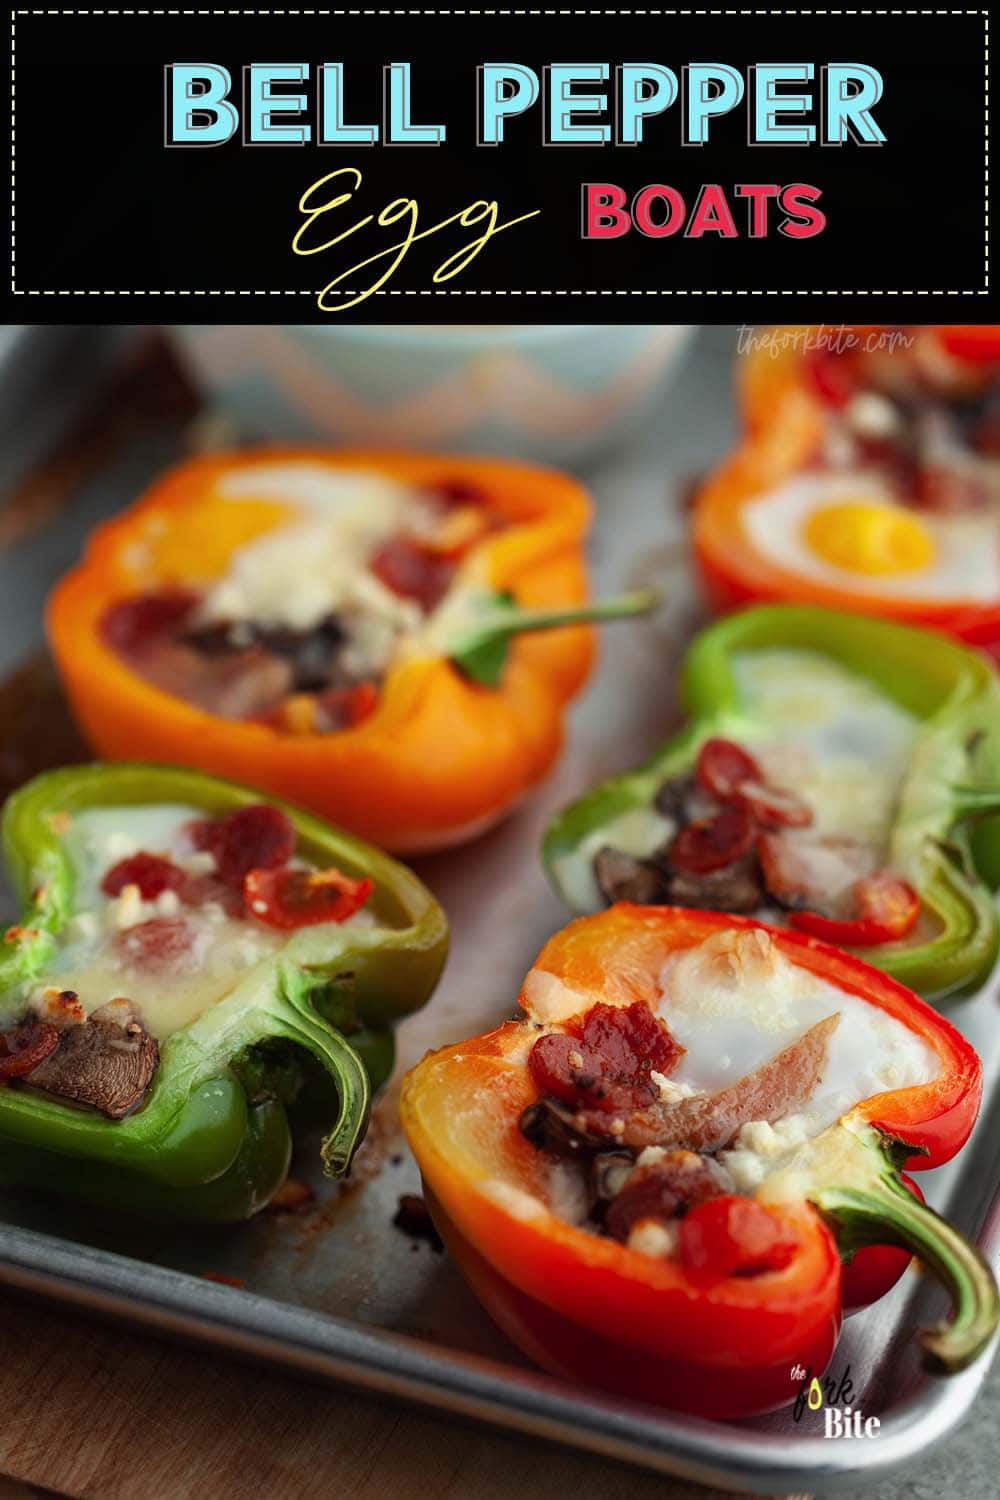 Bell pepper egg boats are fun, easy-to-make, and healthy to have on busy mornings. You can prepare them ahead over the weekend and then enjoy them with your family each day of the week.